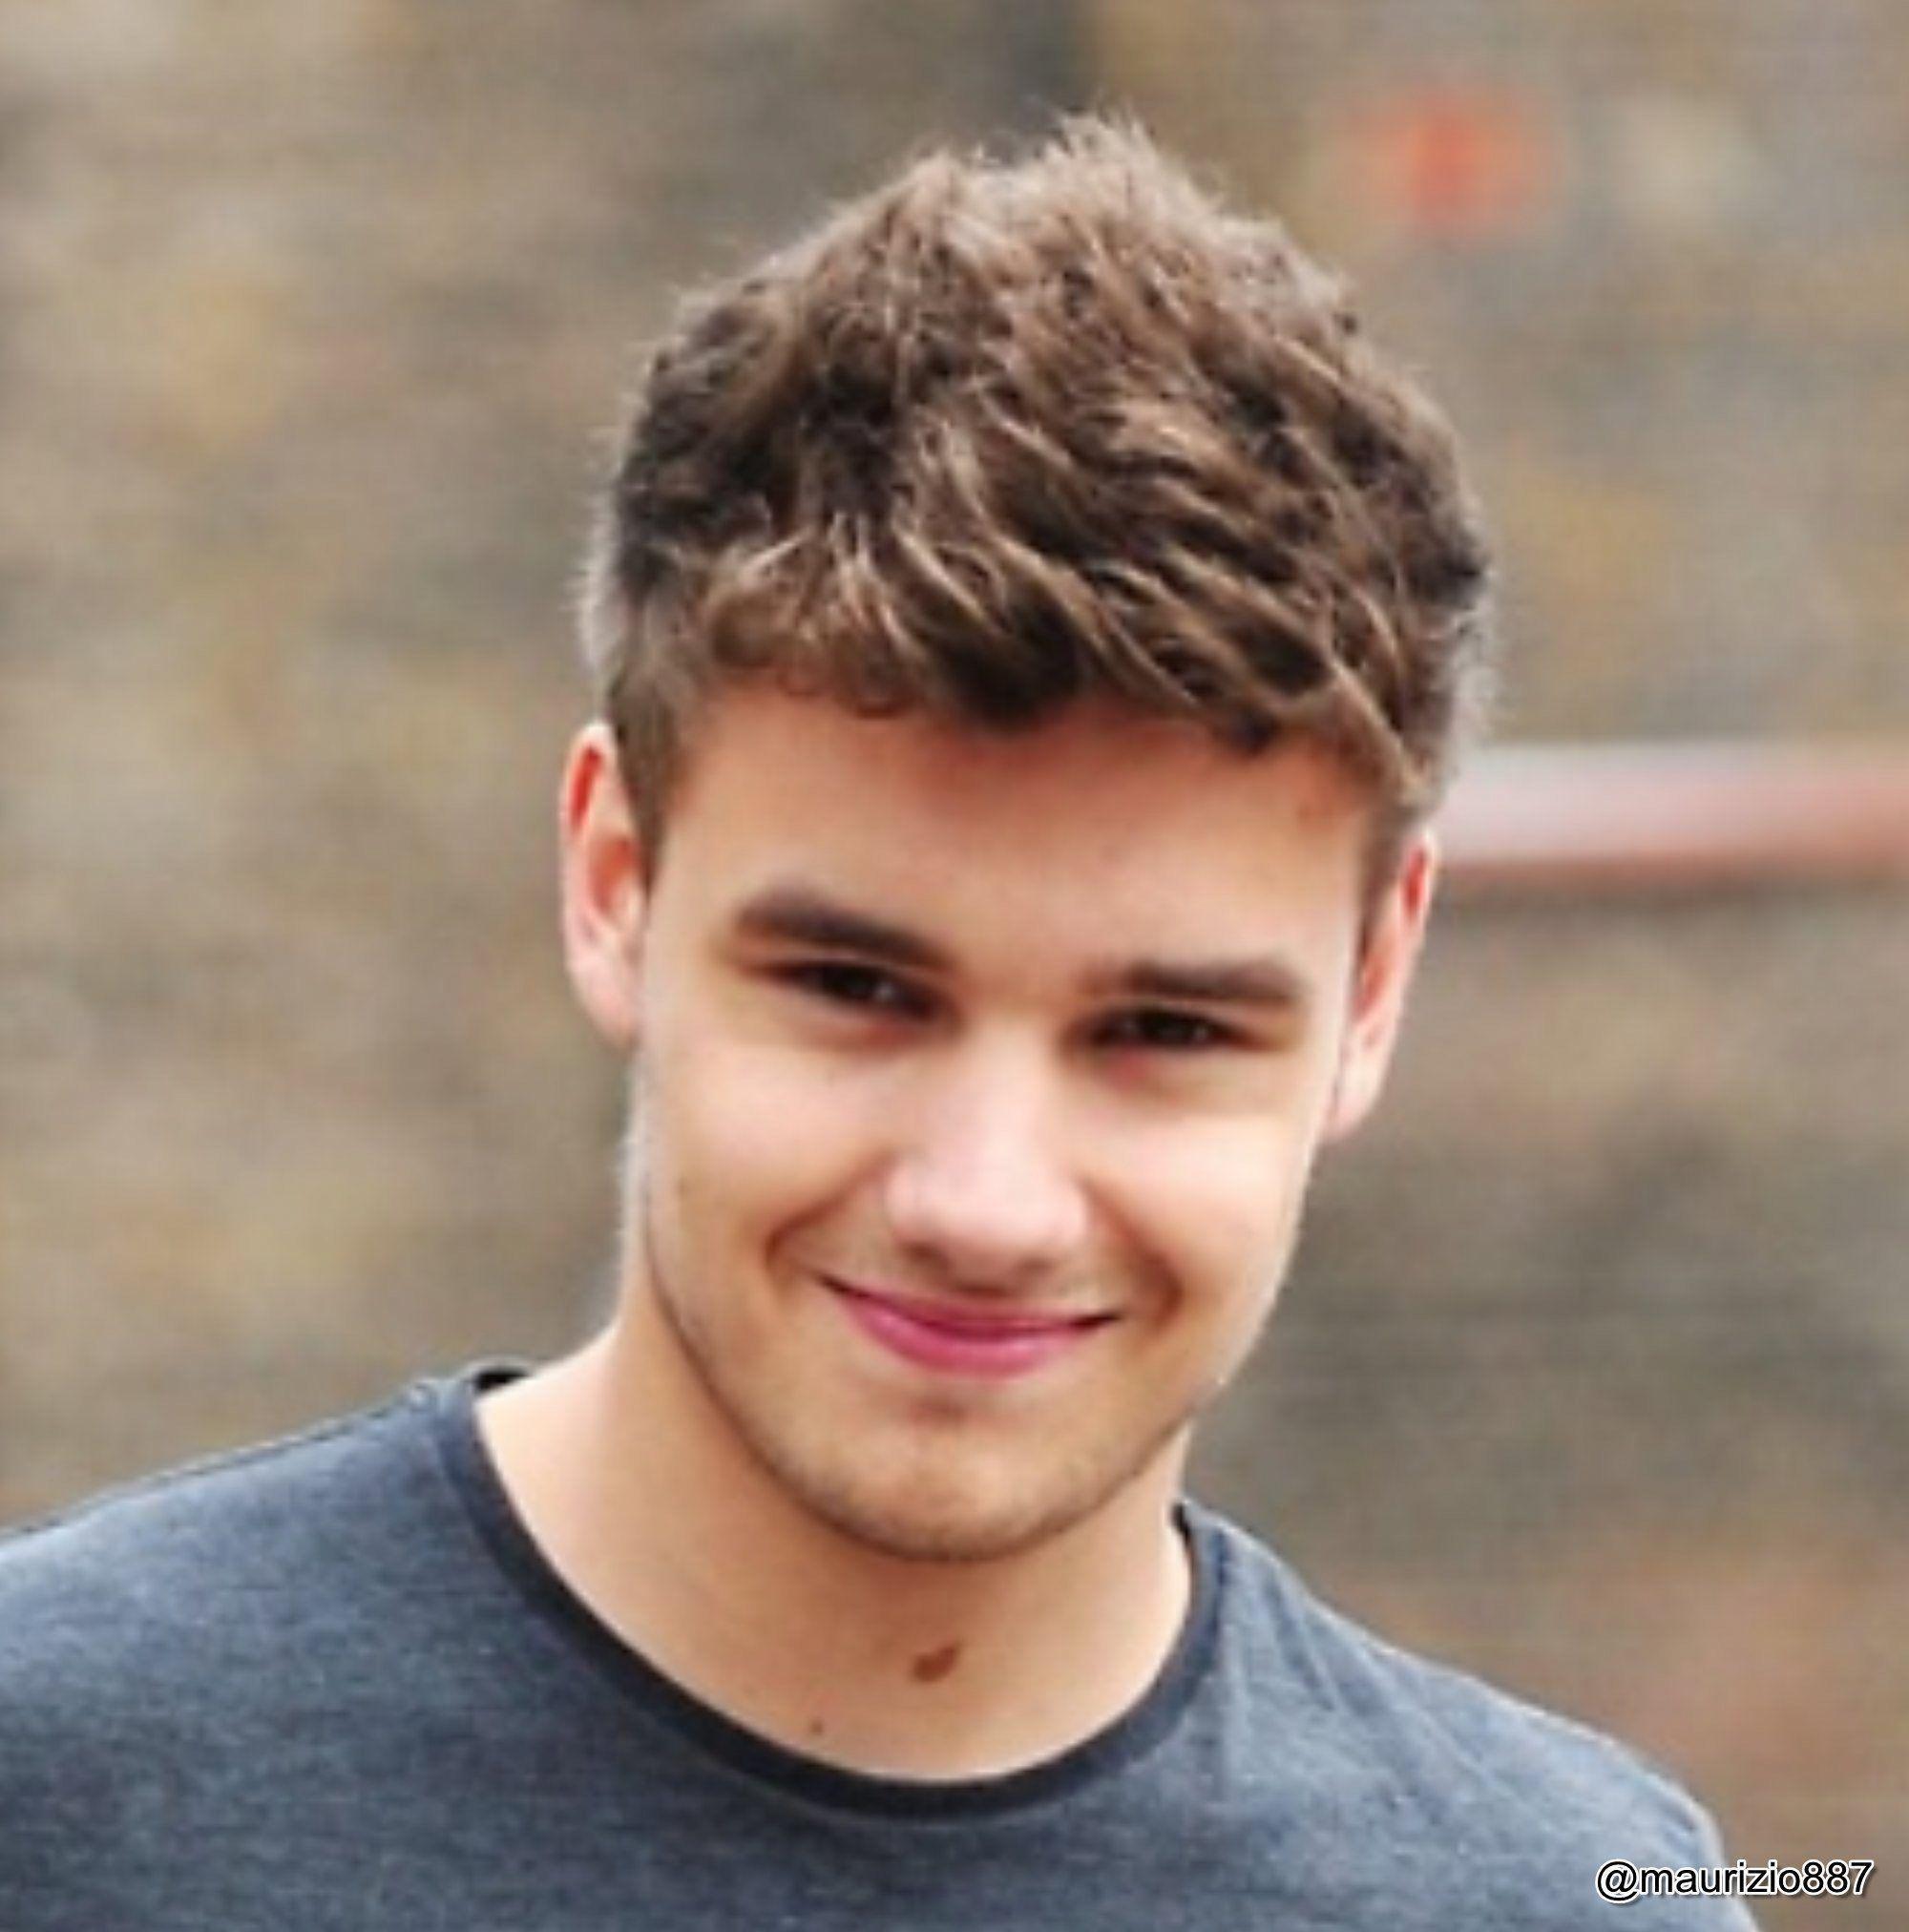 Liam Payne 2012 Picture to